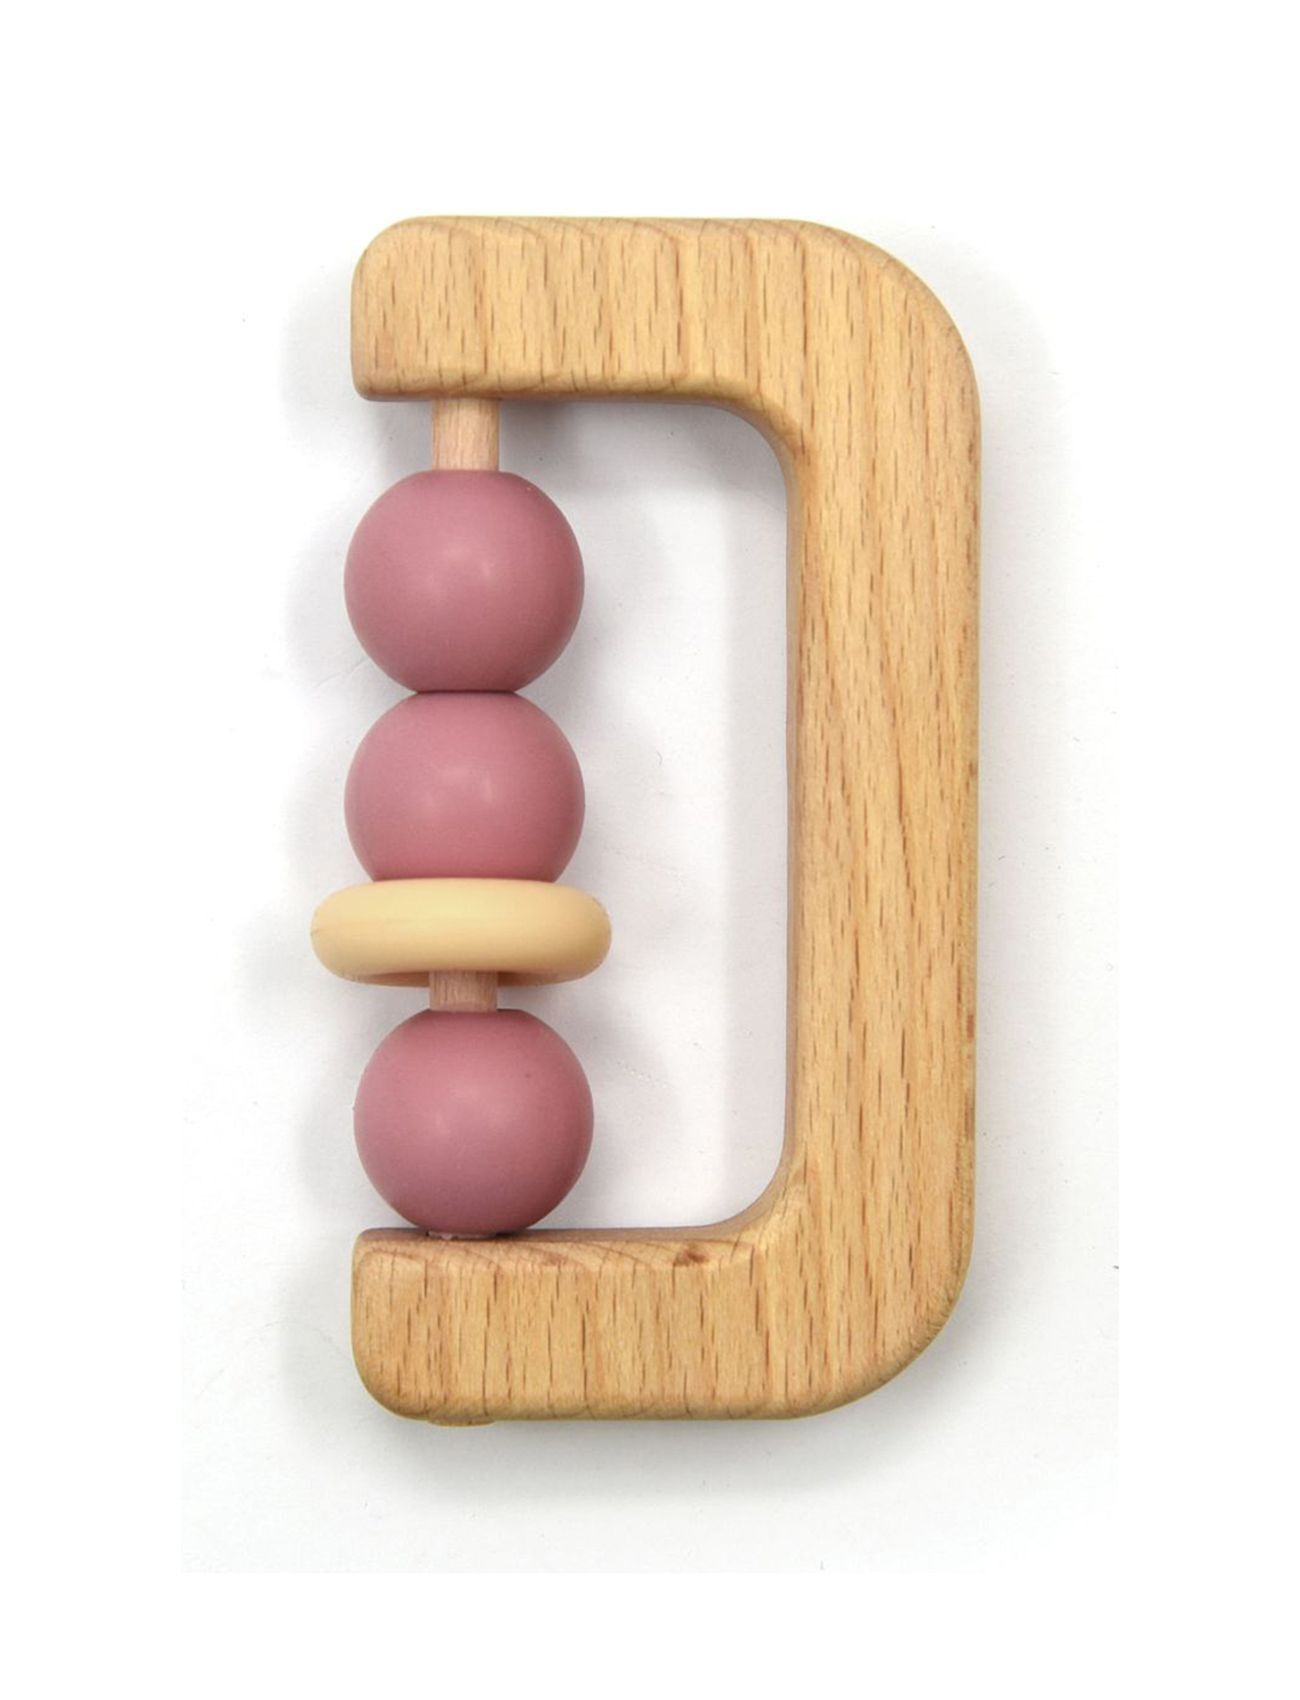 Magni Toys Silic And Wood Bending - Pink Toys Baby Toys Educational Toys Activity Toys Multi/mønstret Magni Toys